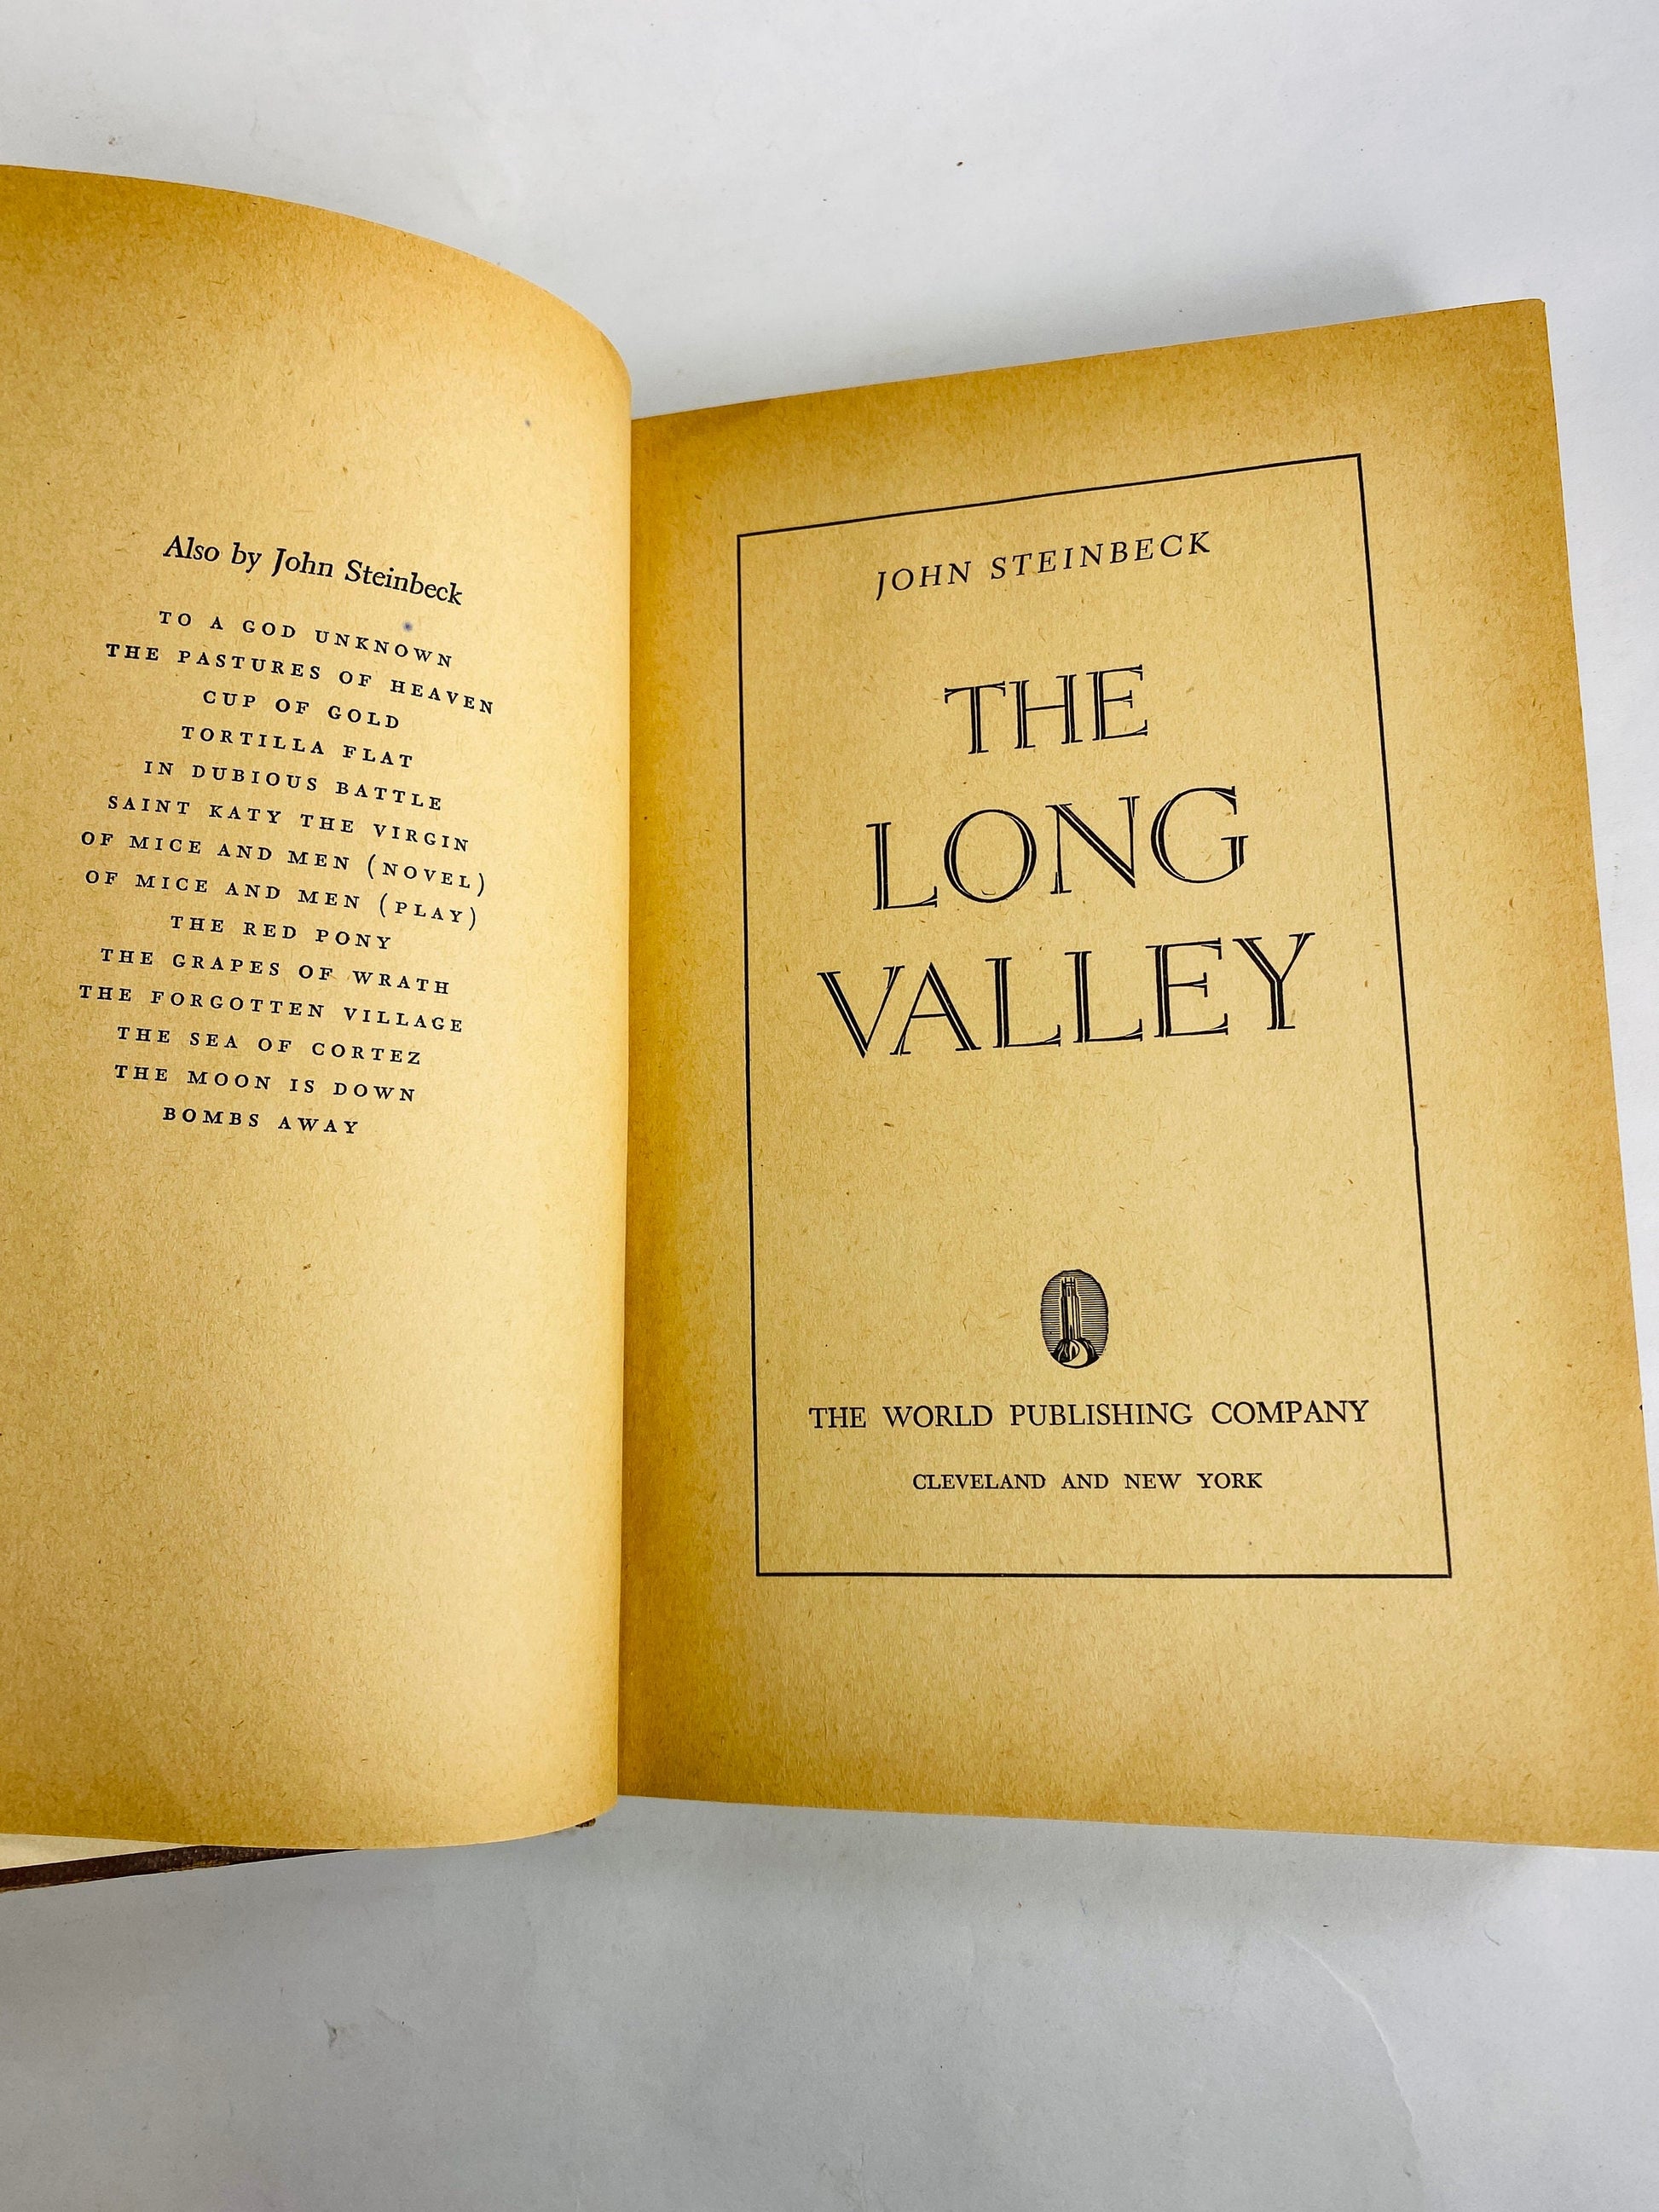 1945 Long Valley by John Steinbeck vintage book collection of short stories of simple people in Salinas Valley California EARLY PRINTING